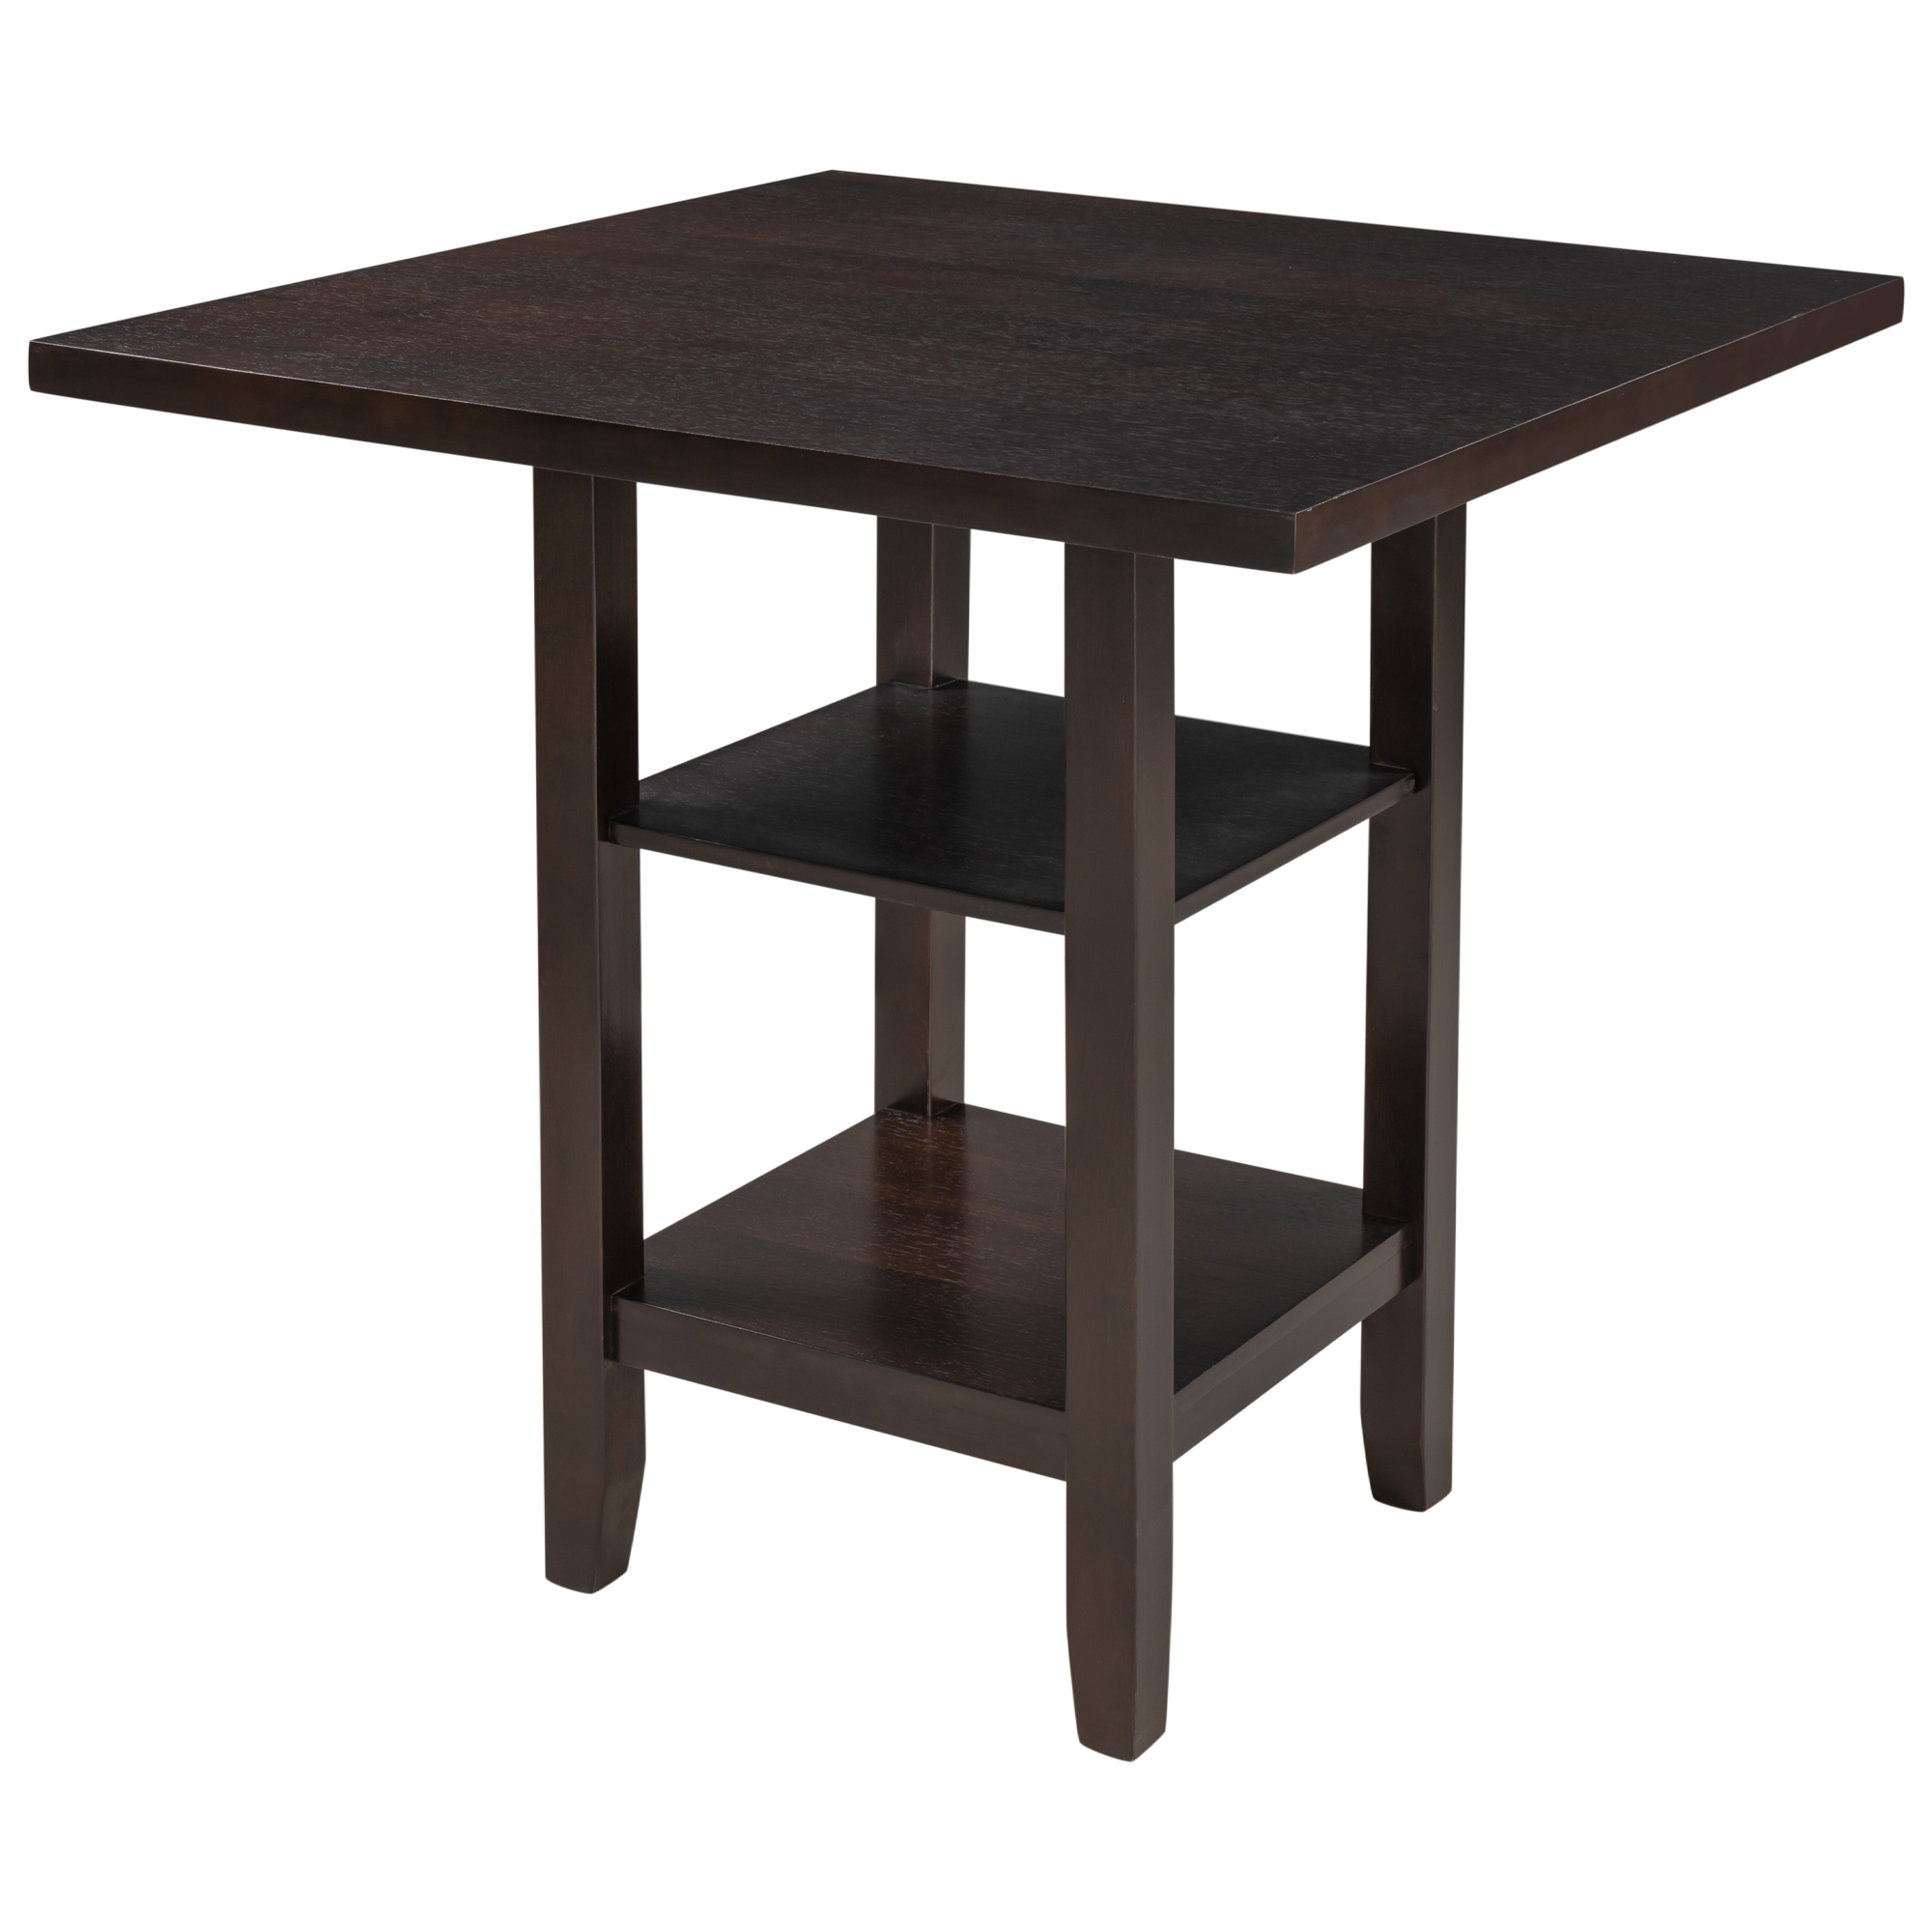 TREXM Square Wooden Counter Height Dining Table with 2-Tier Storage Shelving, Espresso